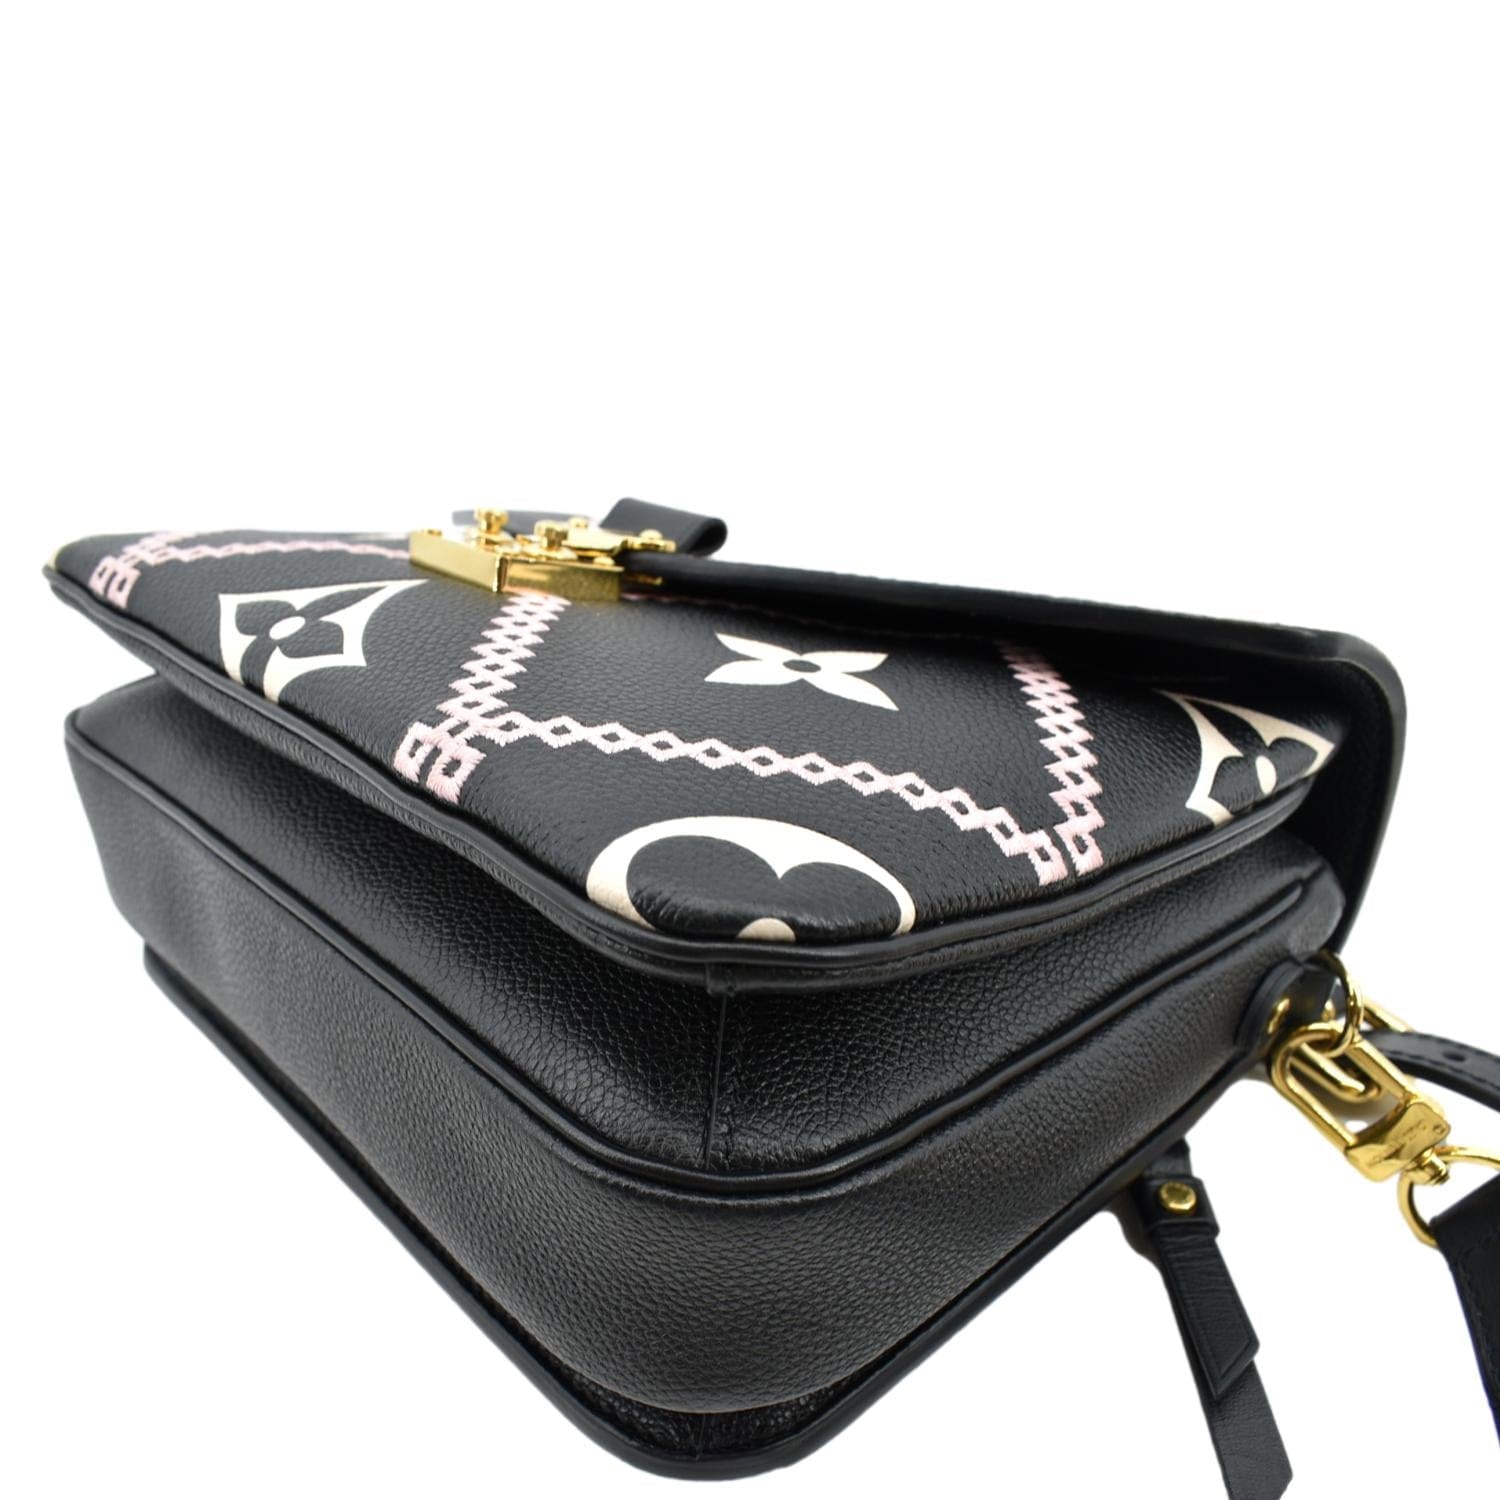 Louis Vuitton on X: Accessorized by an embroidered strap and